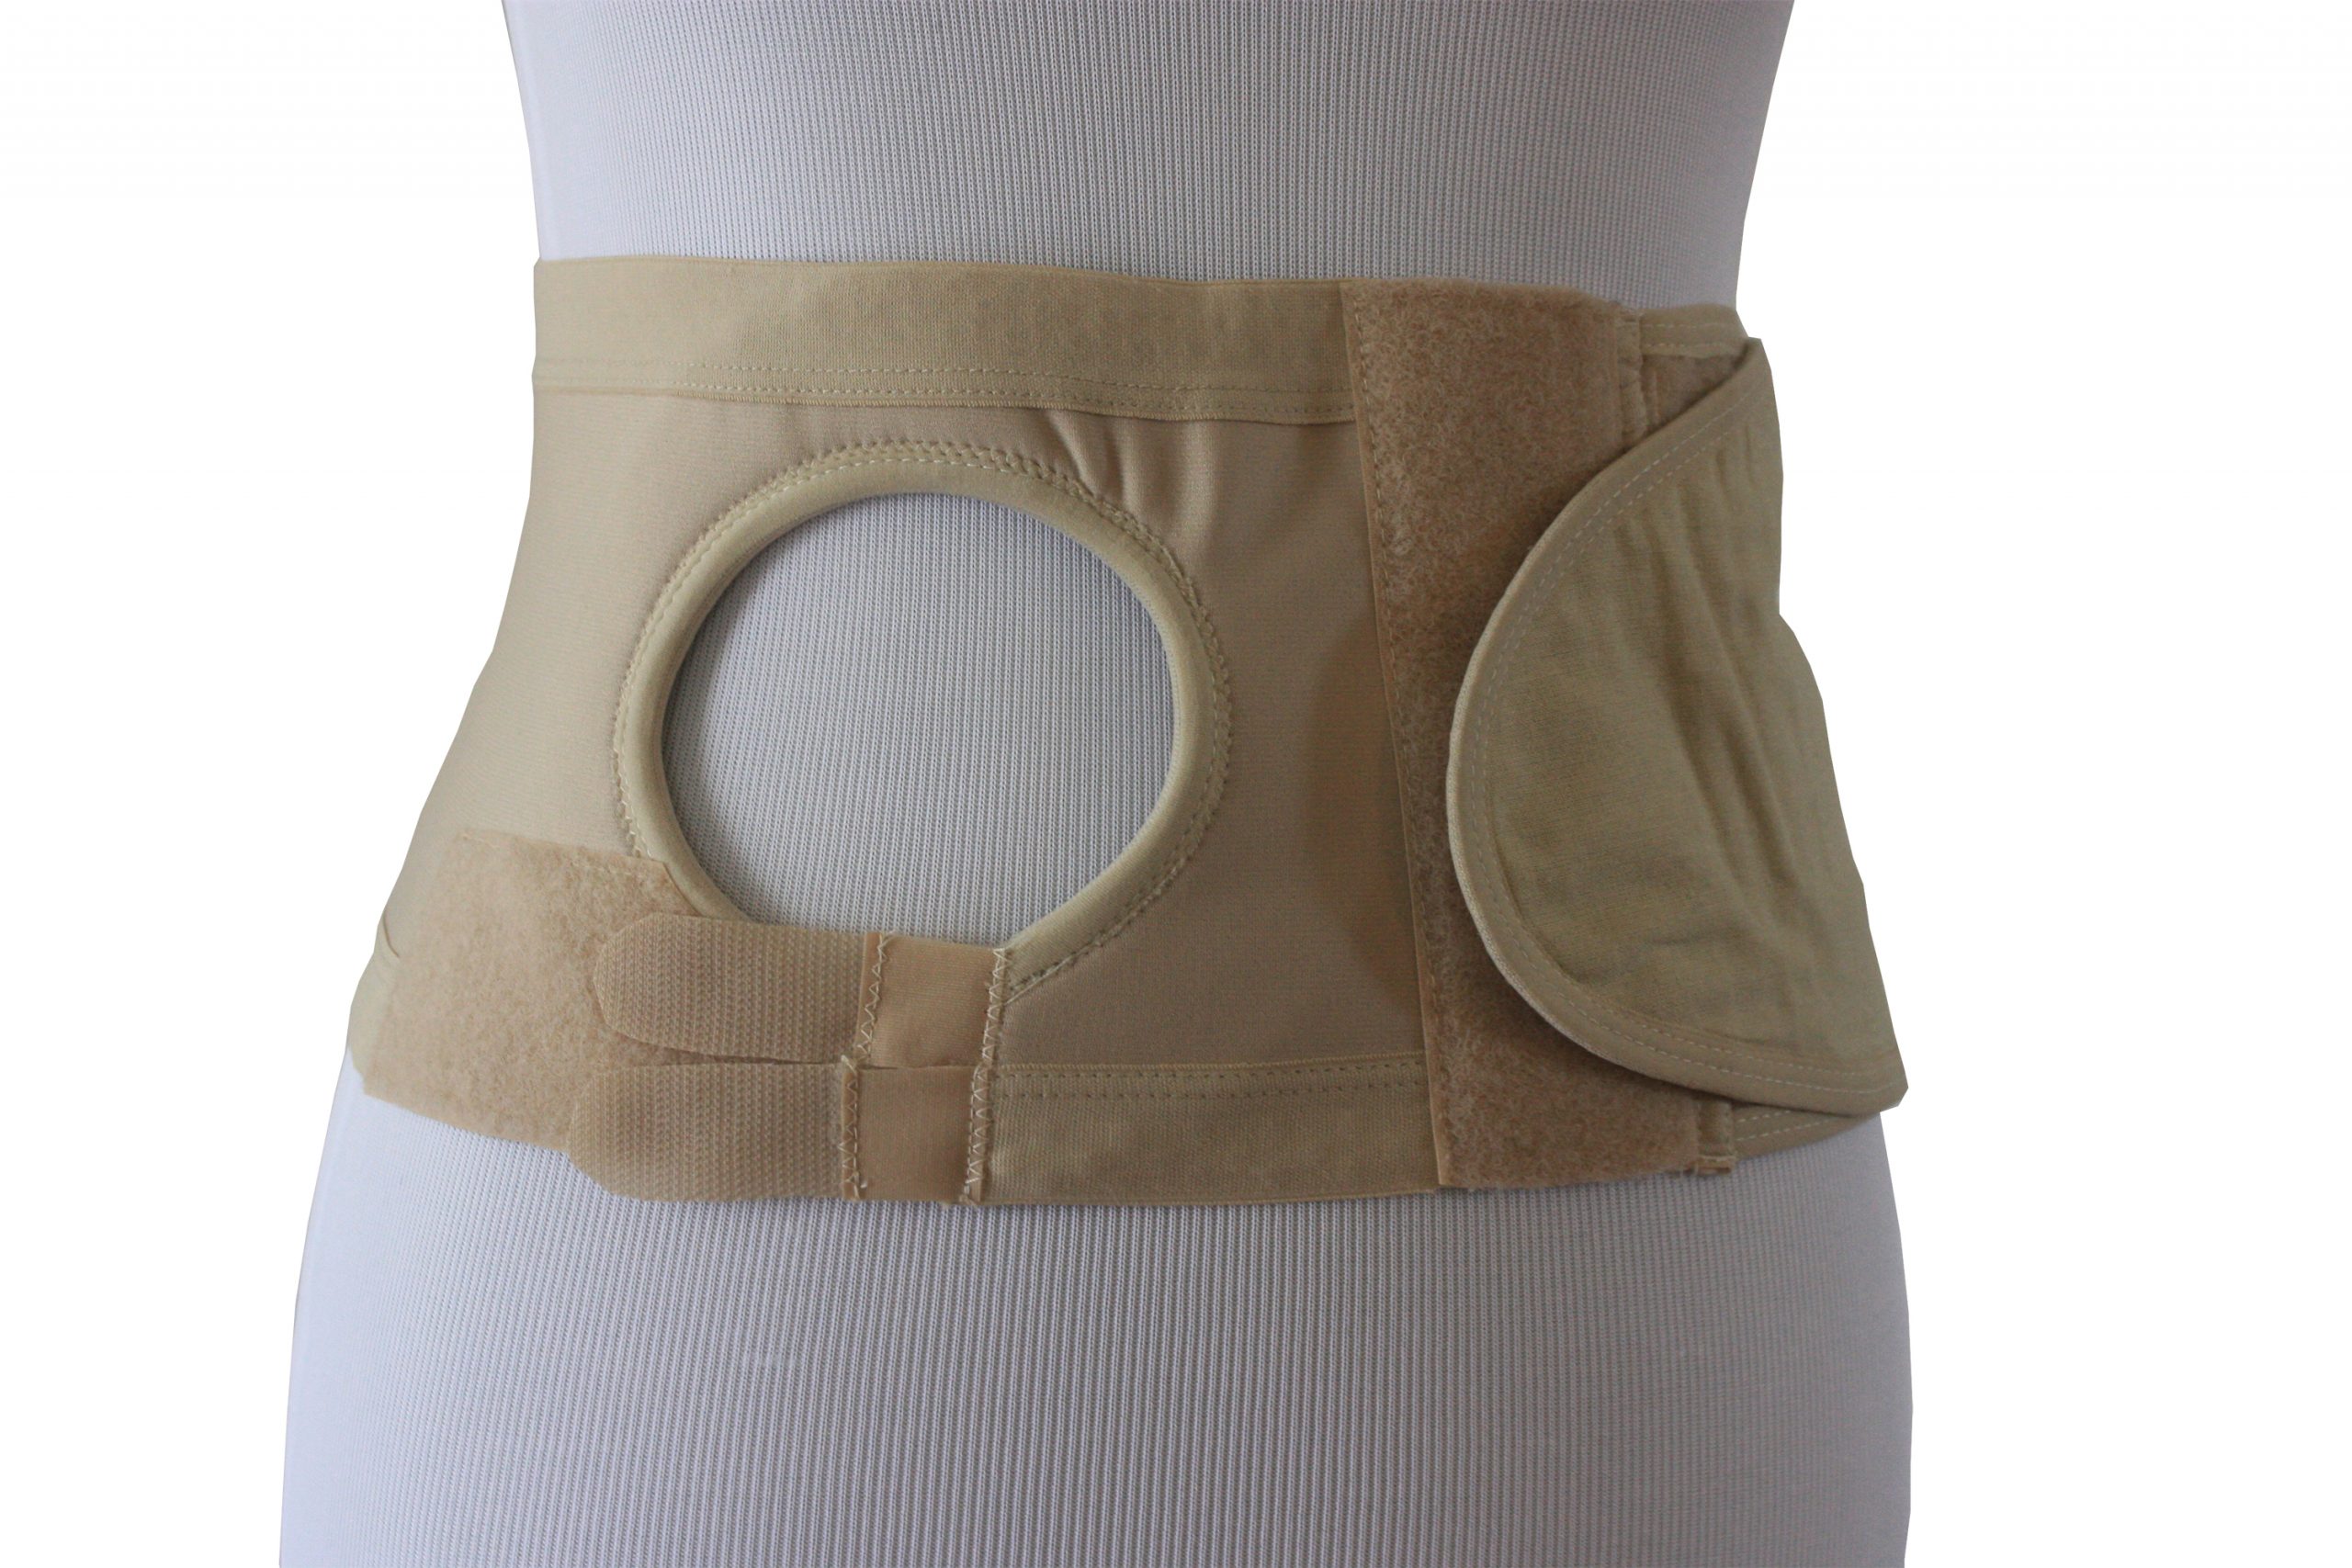 Buy Safe n' Simple Security Ostomy Belt with Pouch Opening at Medical Monks!